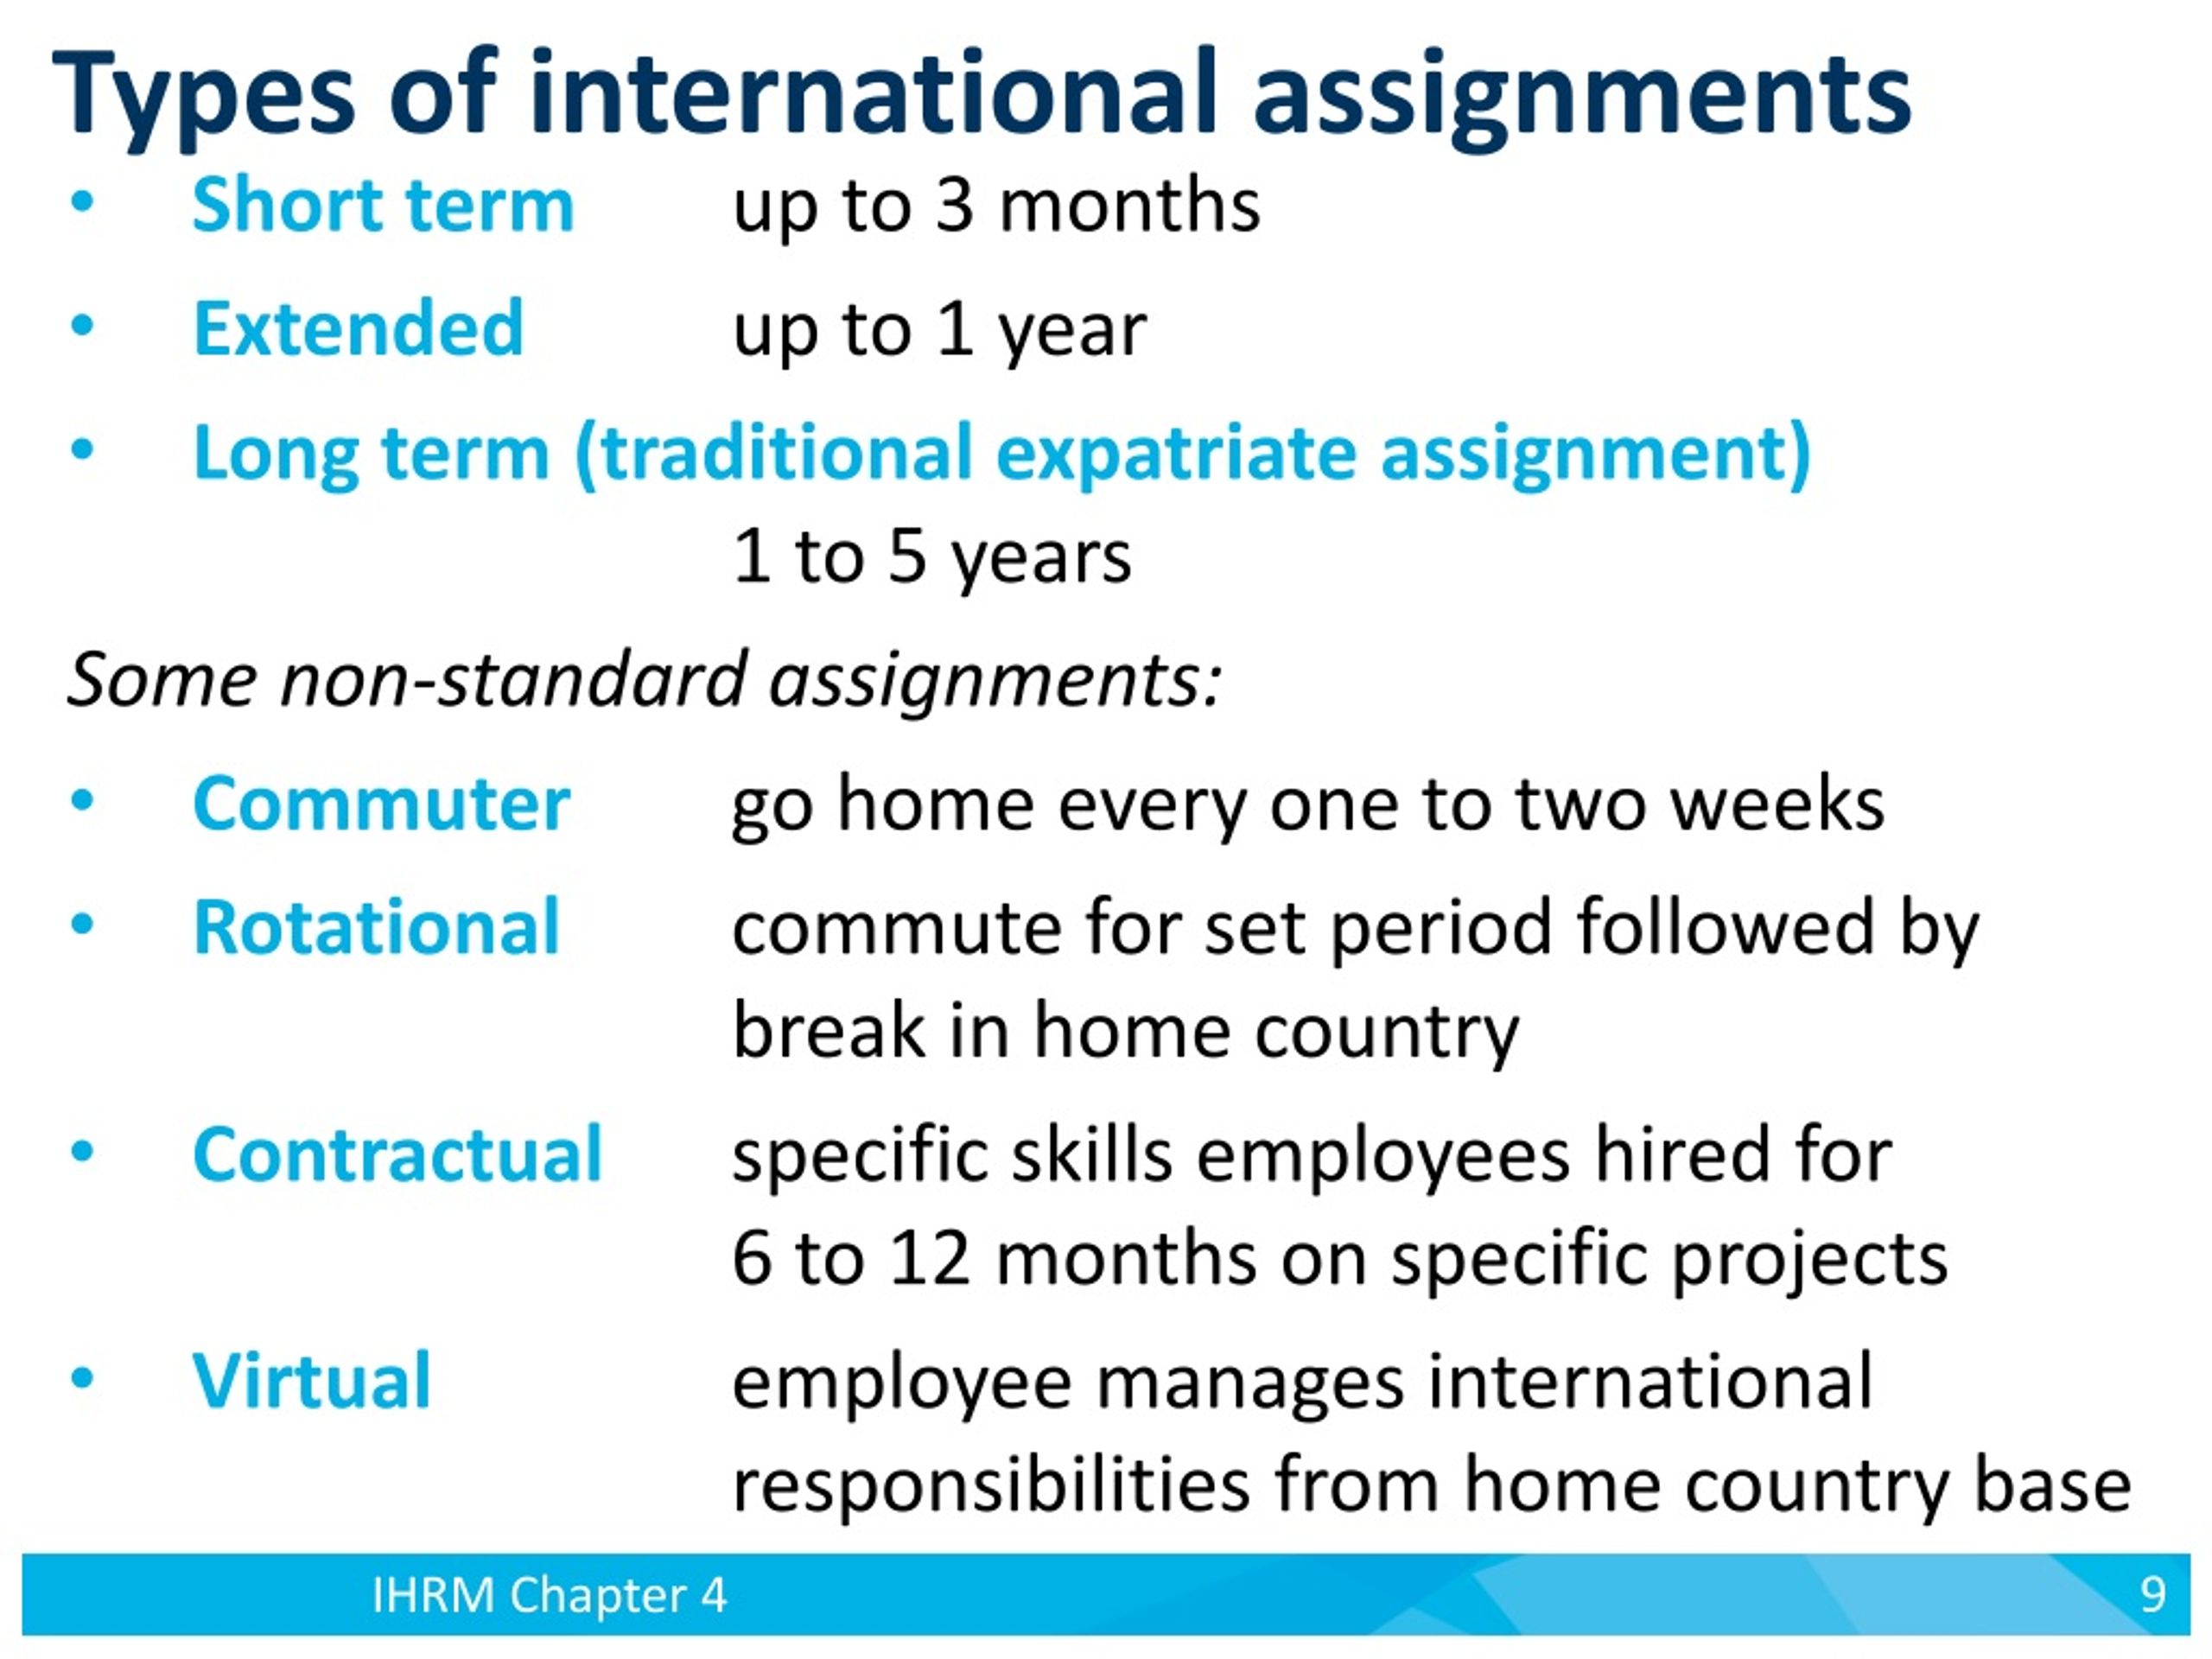 what are the benefits of international assignments